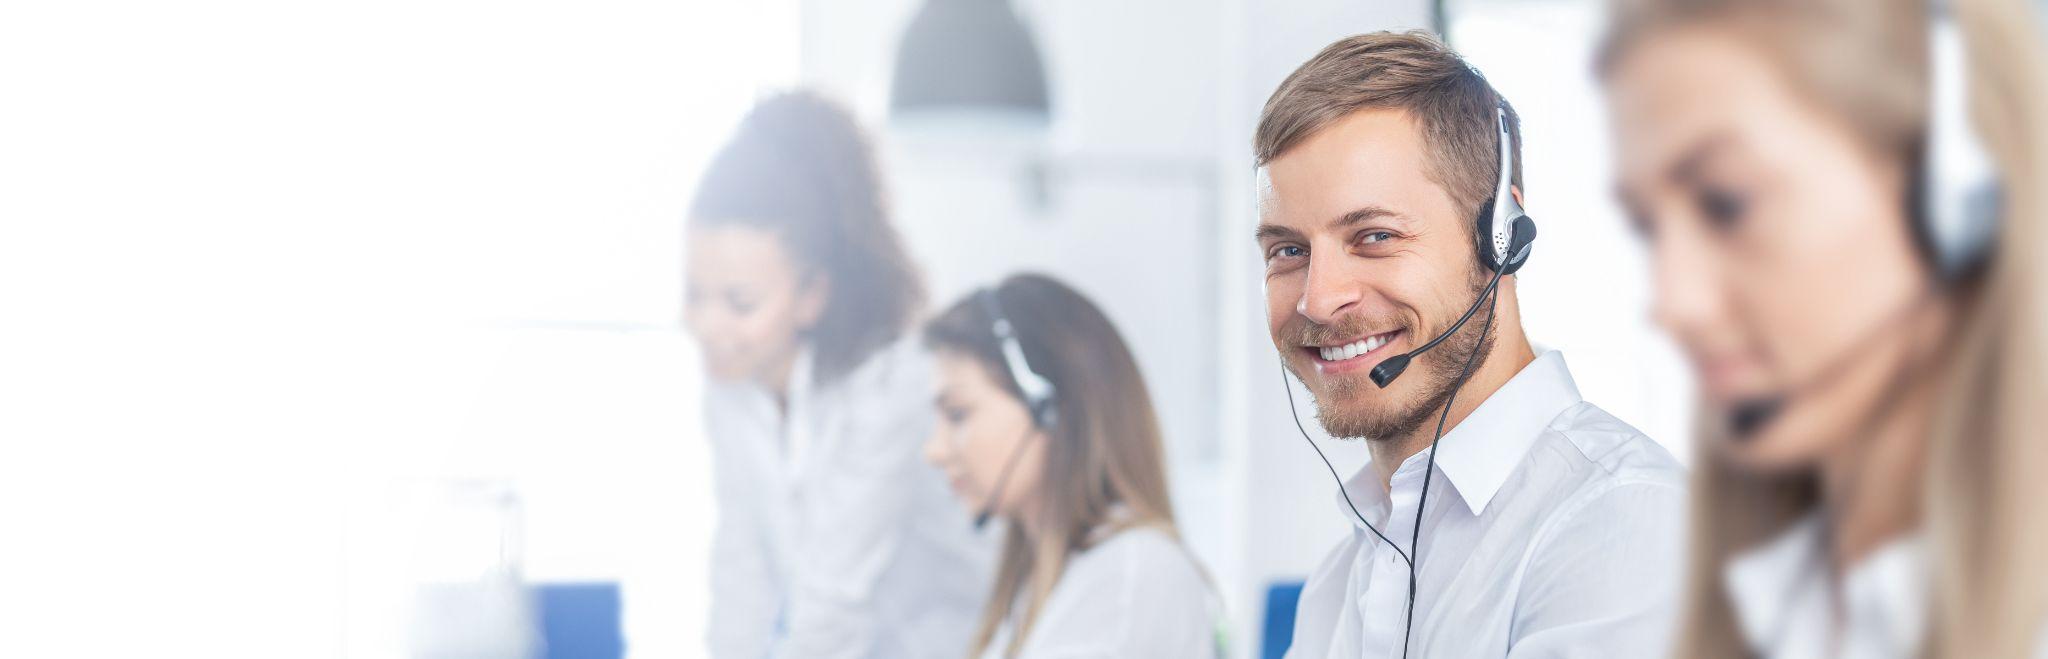 Focus at businessman in headset while consulting customers